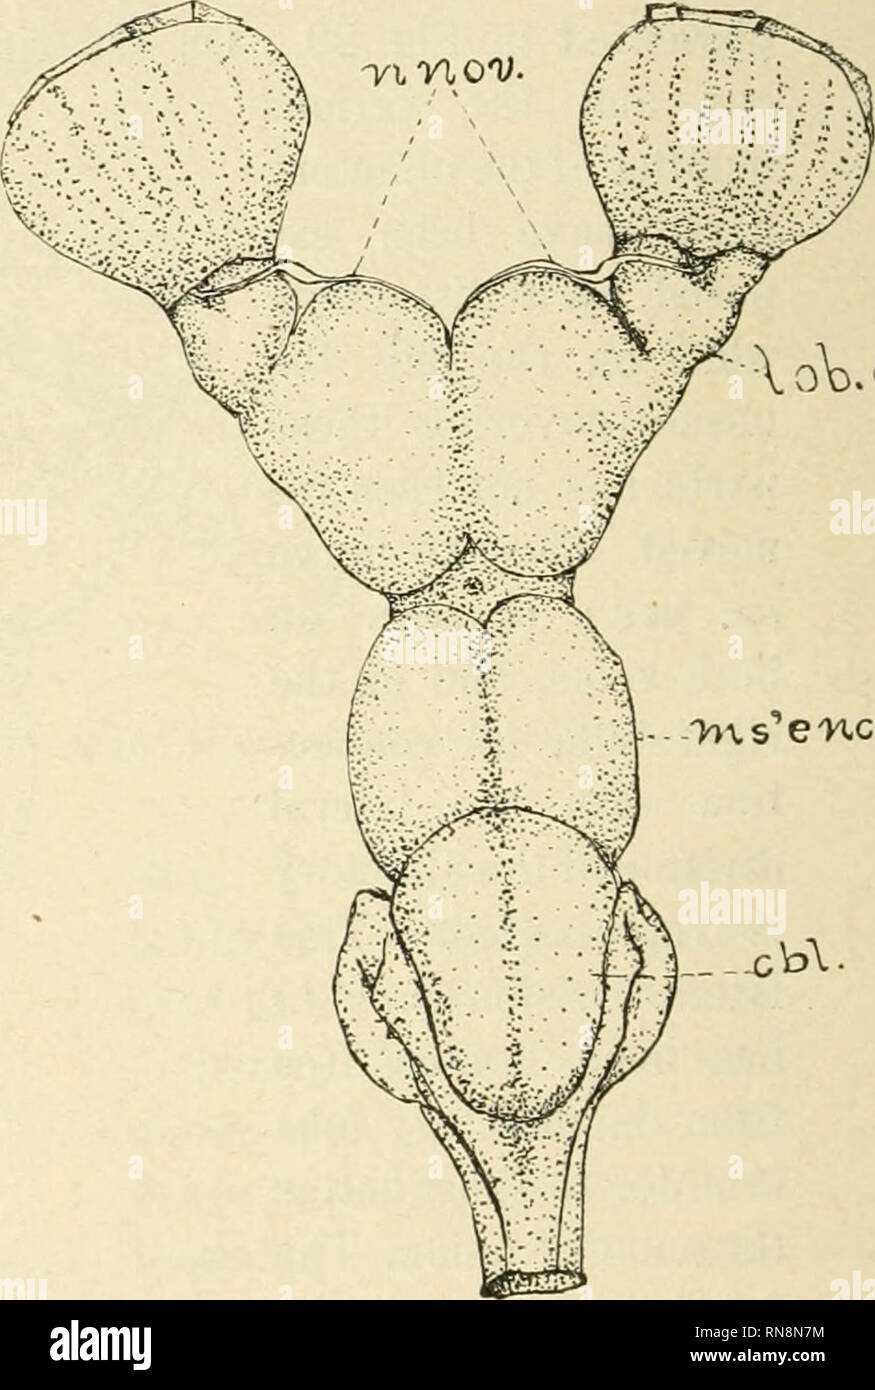 Anatomischer Anzeiger. Anatomy, Comparative; Anatomy, Comparative. oV o^.  -V)is''e'Hce- Fig. 30. Fig. 31. a Fig. 30. Brain of embryo of Squalus  acanthias 68 mm long. X about 10. Fig. 31. Dorsal